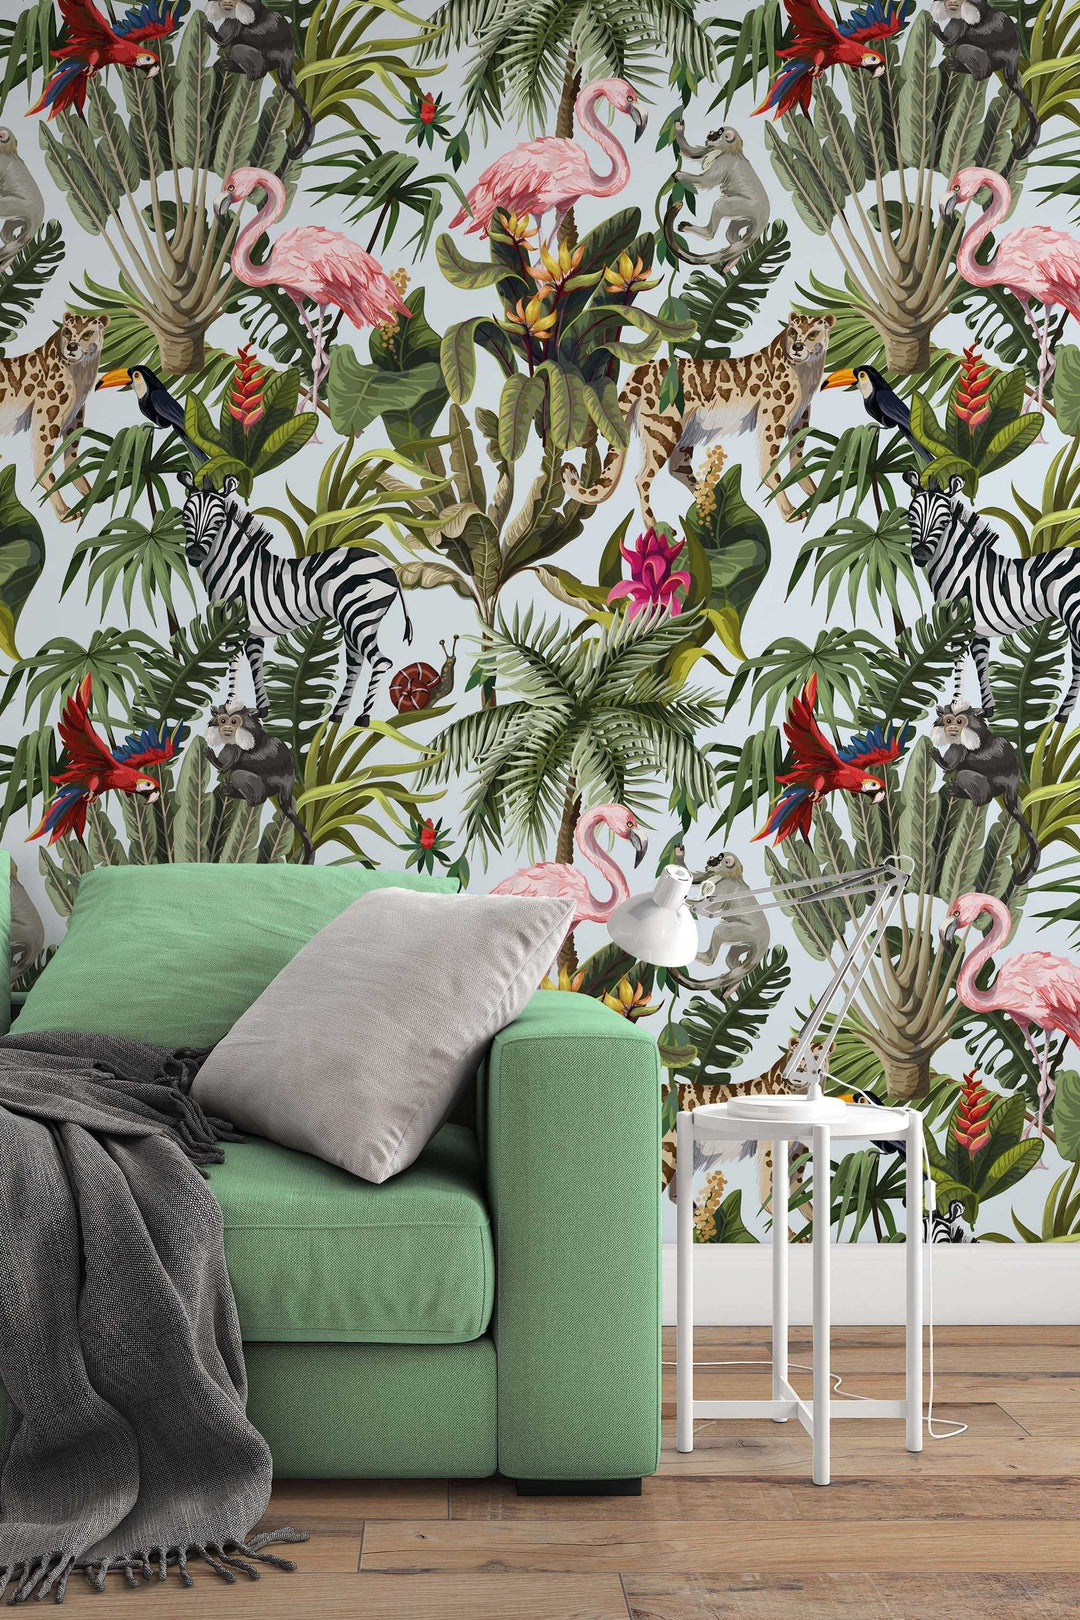 Tropical Animals in the jungle wallpaper, Peel & Stick, Removable, Self Adhesive